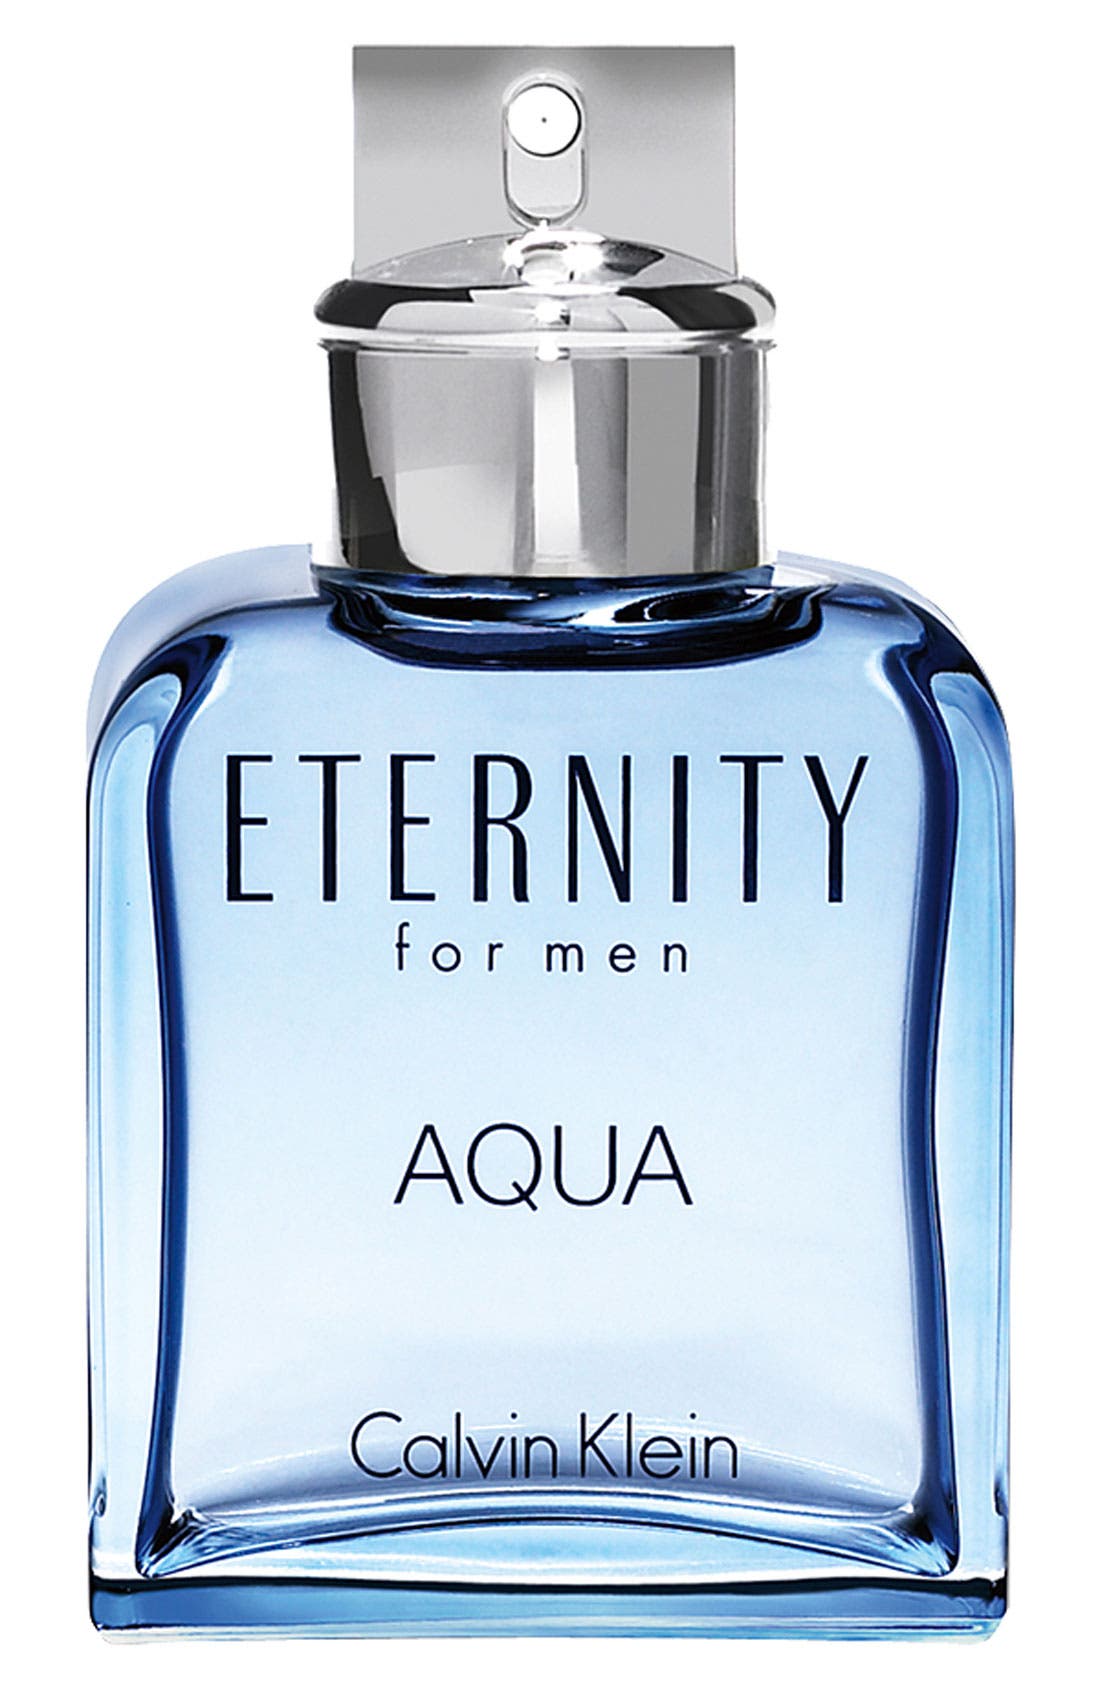 EAN 3607342107977 product image for Eternity Aqua by Calvin Klein Cologne 3.4 oz | upcitemdb.com